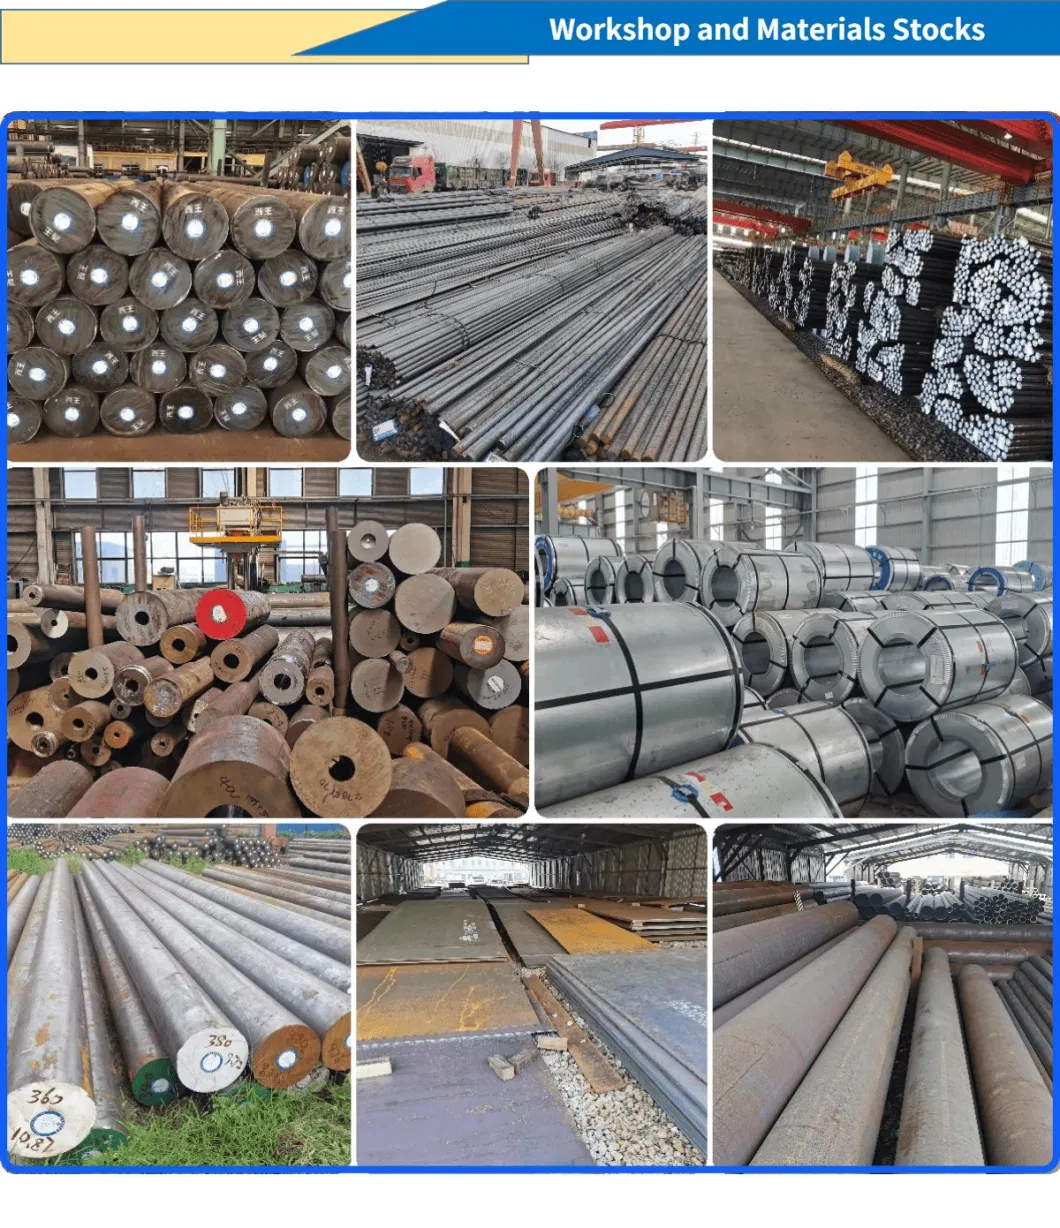 Galvanize 42CrMo S355jr St37 En10025 Ss490 Ss400 C45 S45c Q235 ASTM A283 A283A A283gr SAE 1045 4140 4340 10/15/16/20mm Round/Flat Hot Rolled Carbon Steel Bar